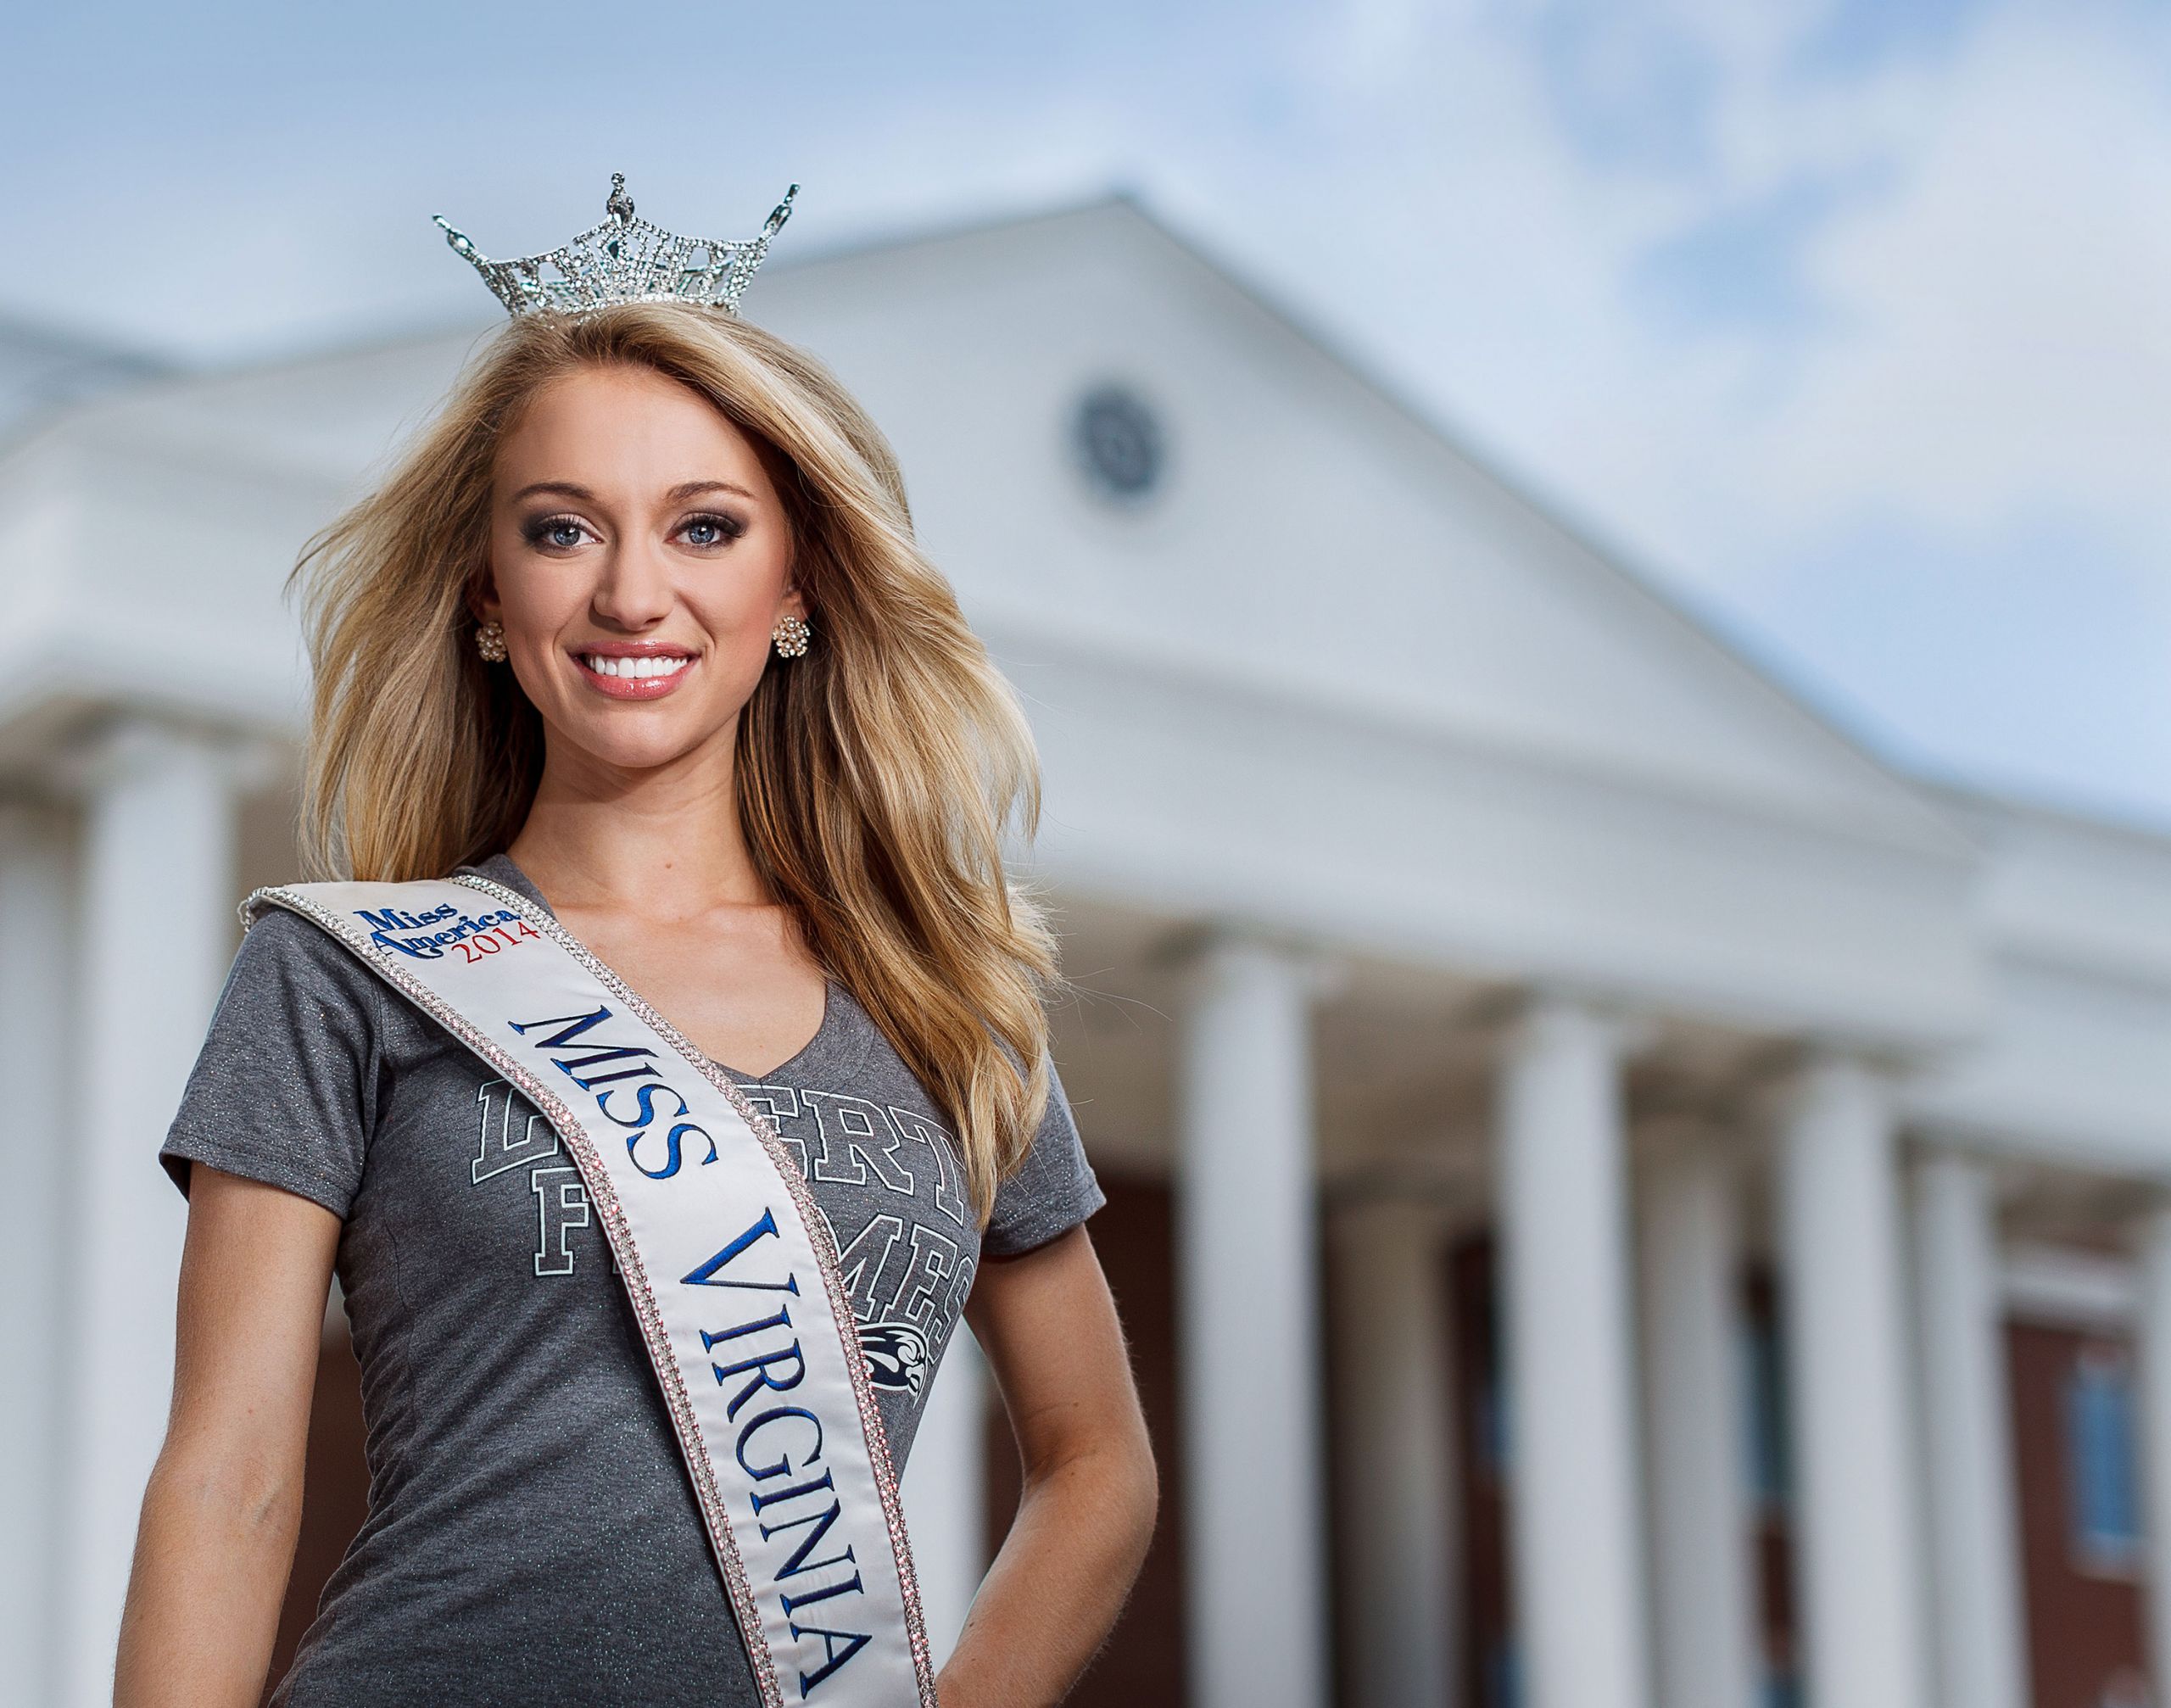 Recent Liberty University graduate Courtney Garrett was the first runner-up in the 2015 Miss America Competition, which aired on ABC on Sunday, Sept. 14.